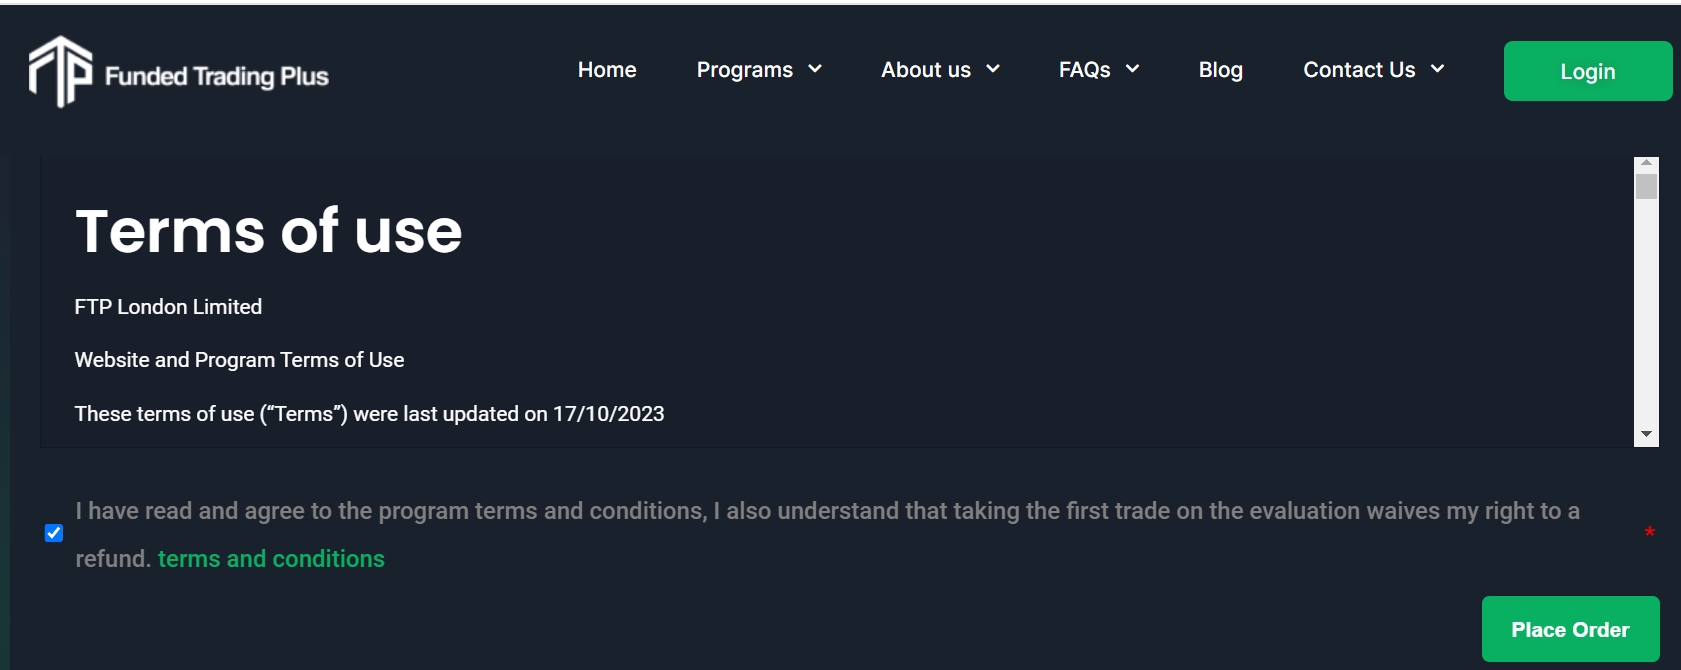 Funded Trading Plus screenshot of placing order.